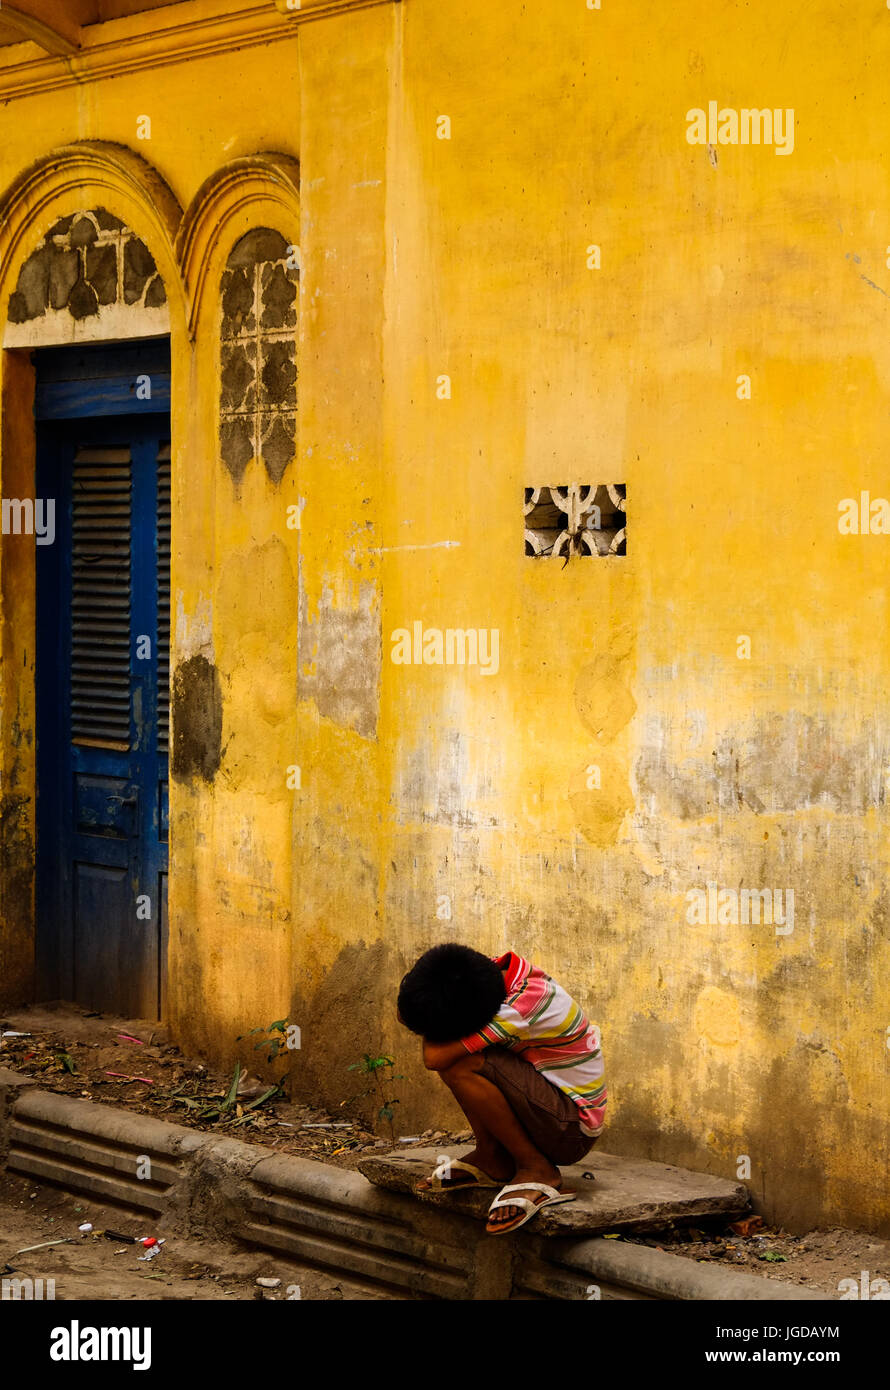 A Khmer boy sits outside an old building in Phnom Penh, Cambodia Stock Photo